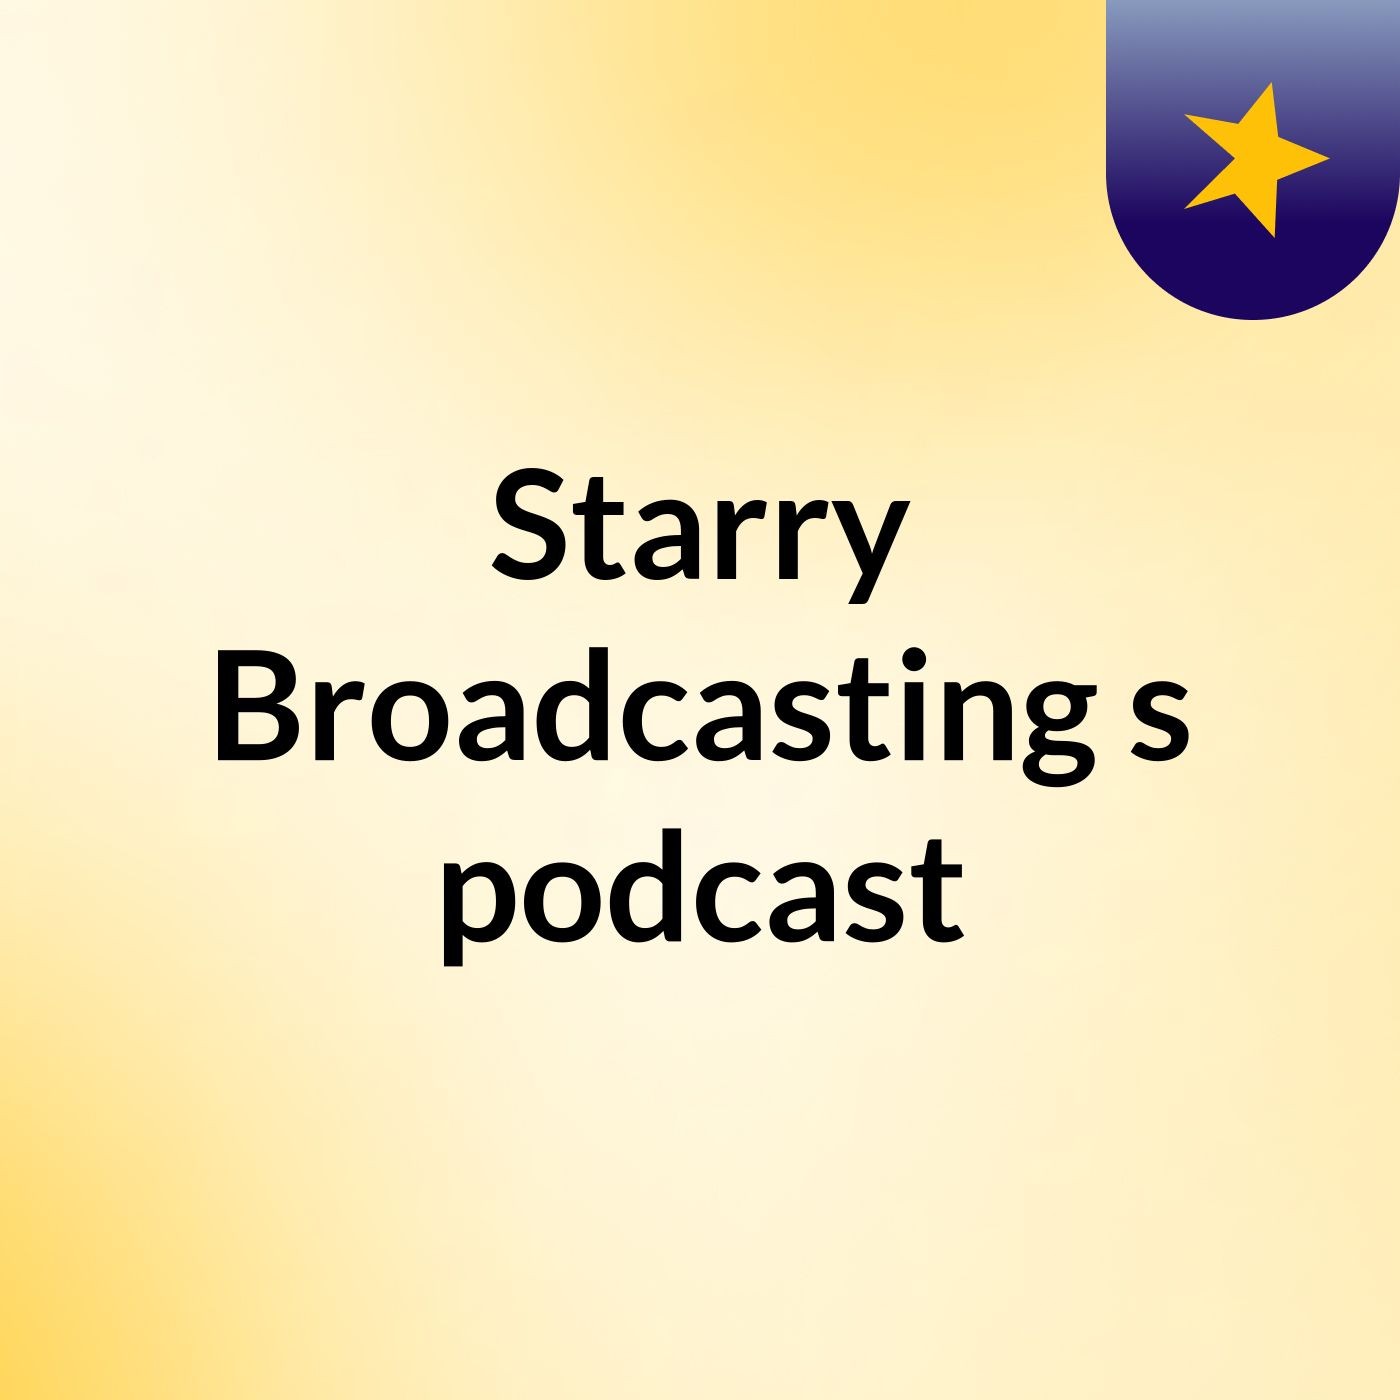 Episode 1 - Starry Broadcasting's podcast